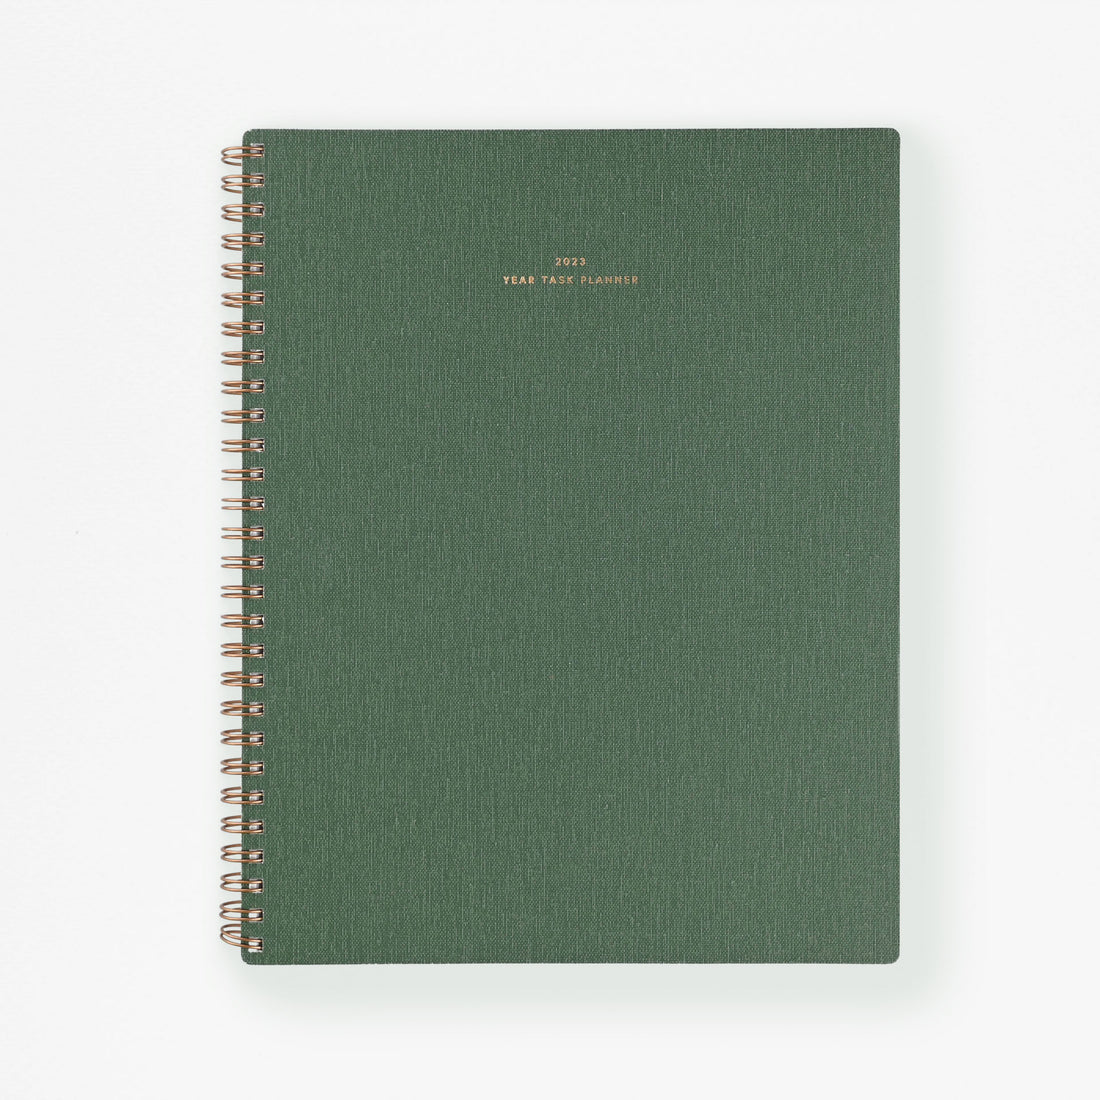 Appointed 2023 Year Task Planner | Mineral Green, Charcoal Gray, Lavender Gray, Fern Green Or Oxford Blue Fern Green